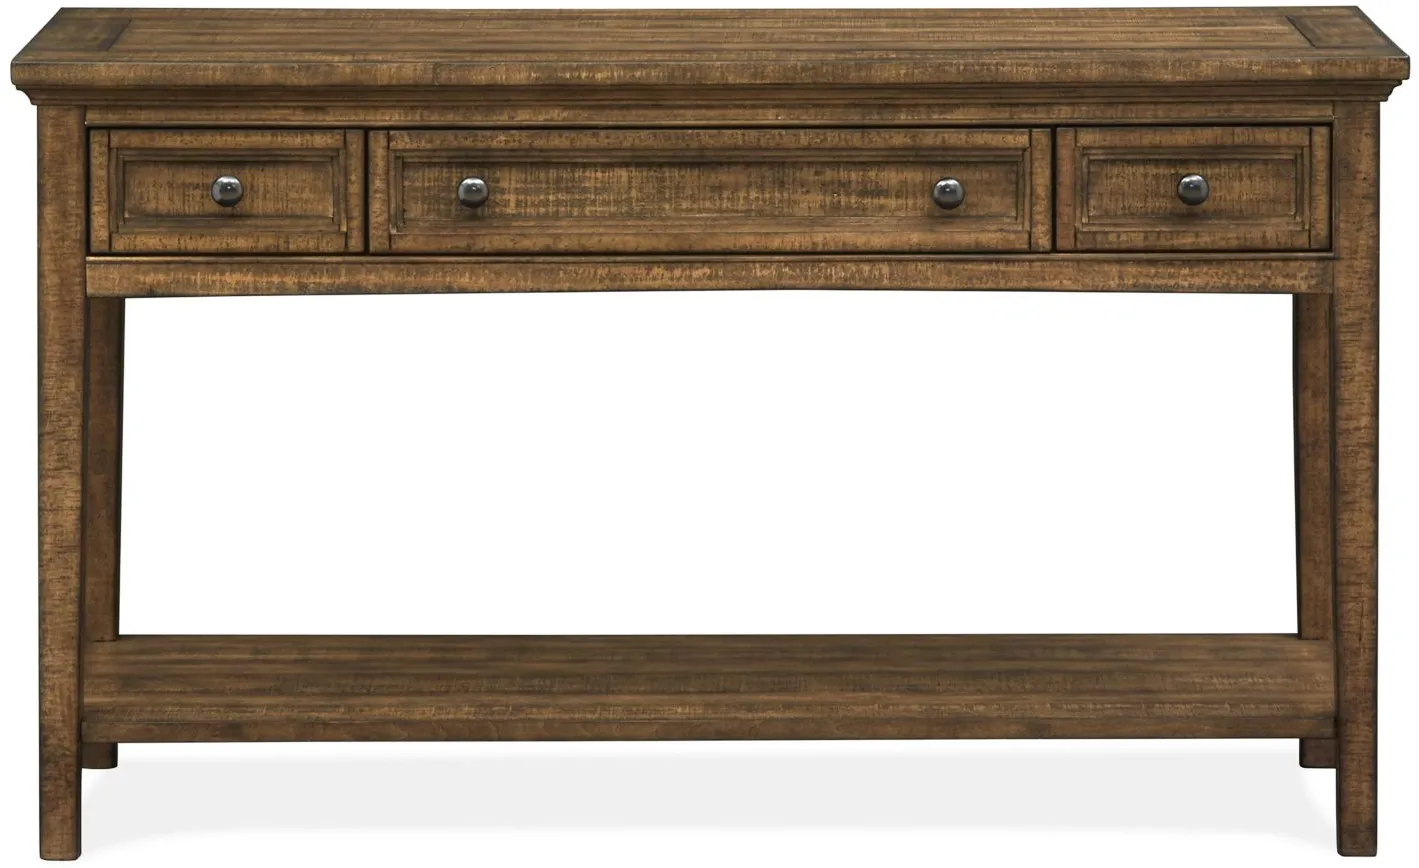 Bay Creek Rectangular Sofa Table in Toasted Nutmeg by Magnussen Home